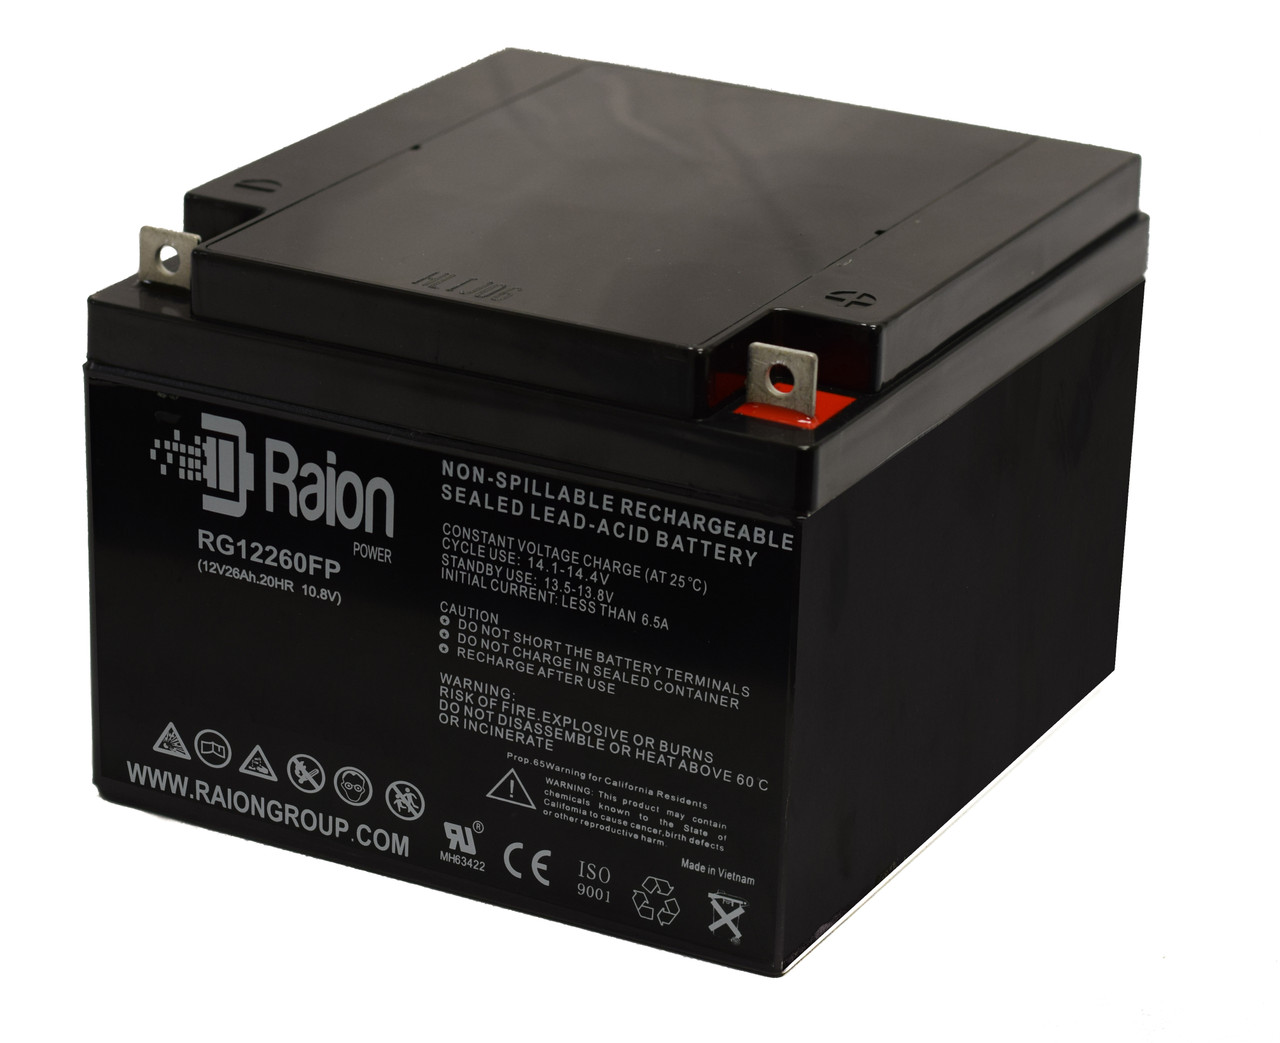 Raion Power Replacement 12V 26Ah Battery for SES BT24-12 - 1 Pack